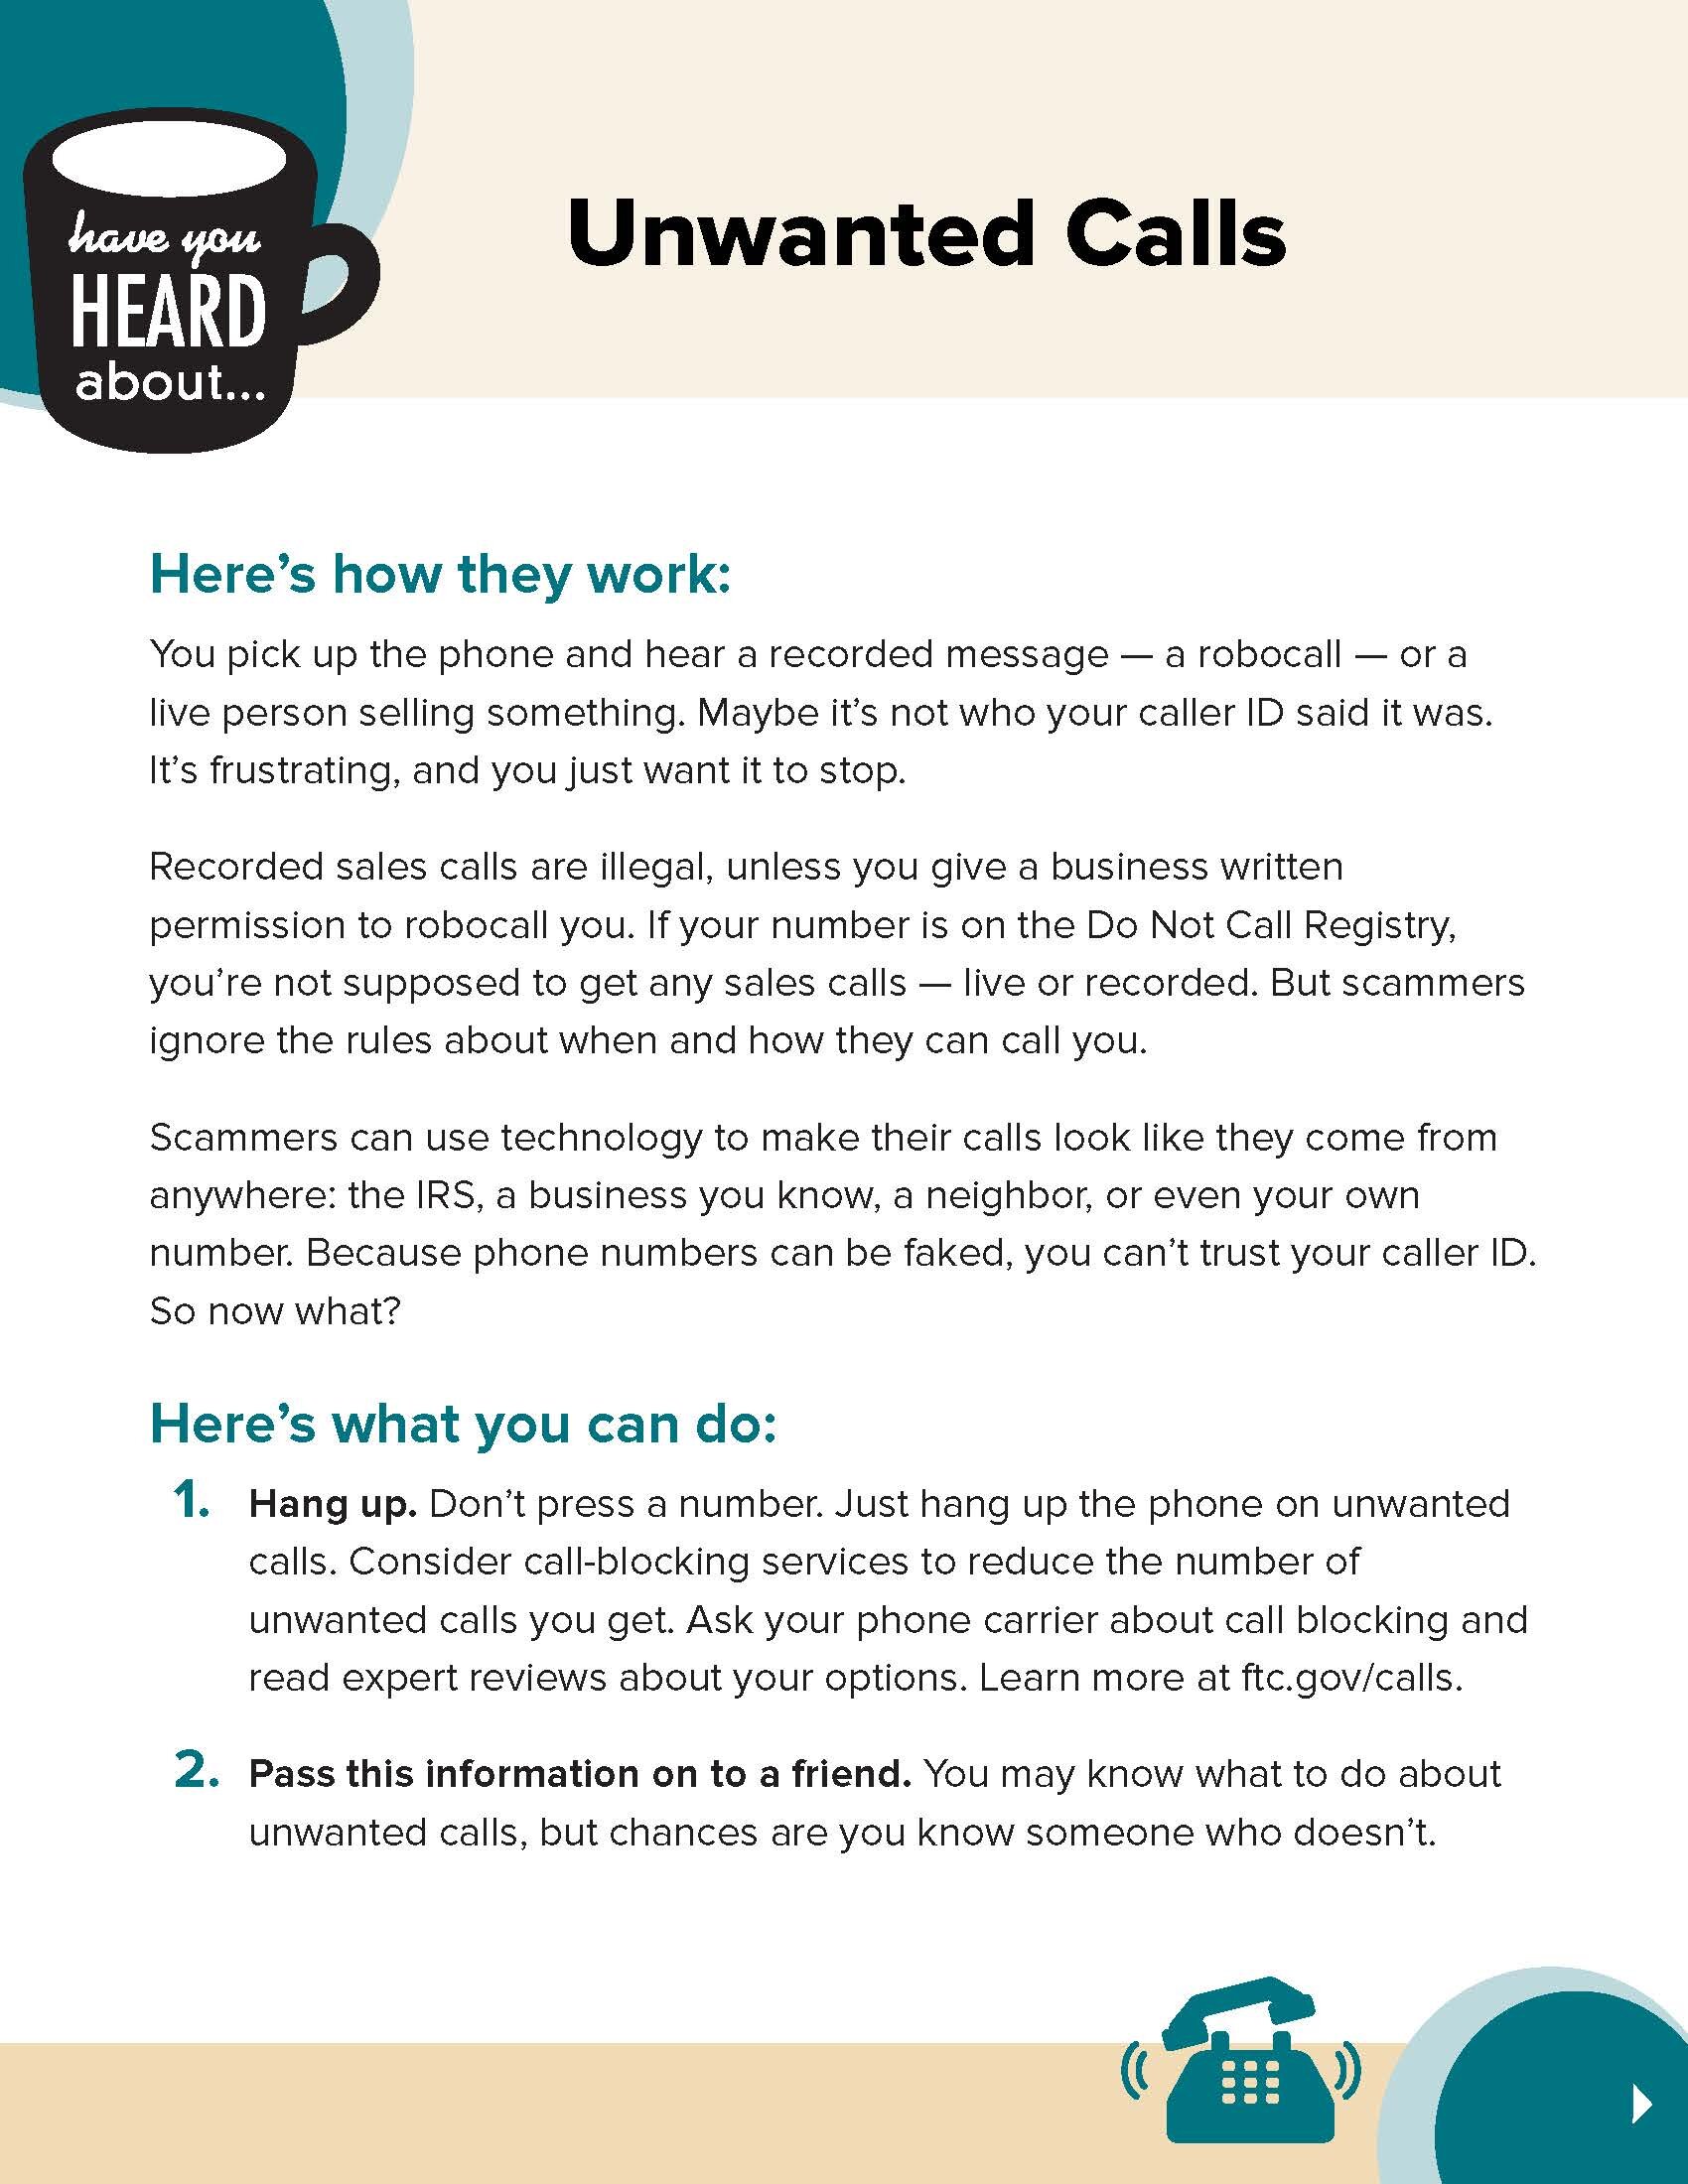 975a-pio-unwanted-calls-tearsheet_Page_1.jpg